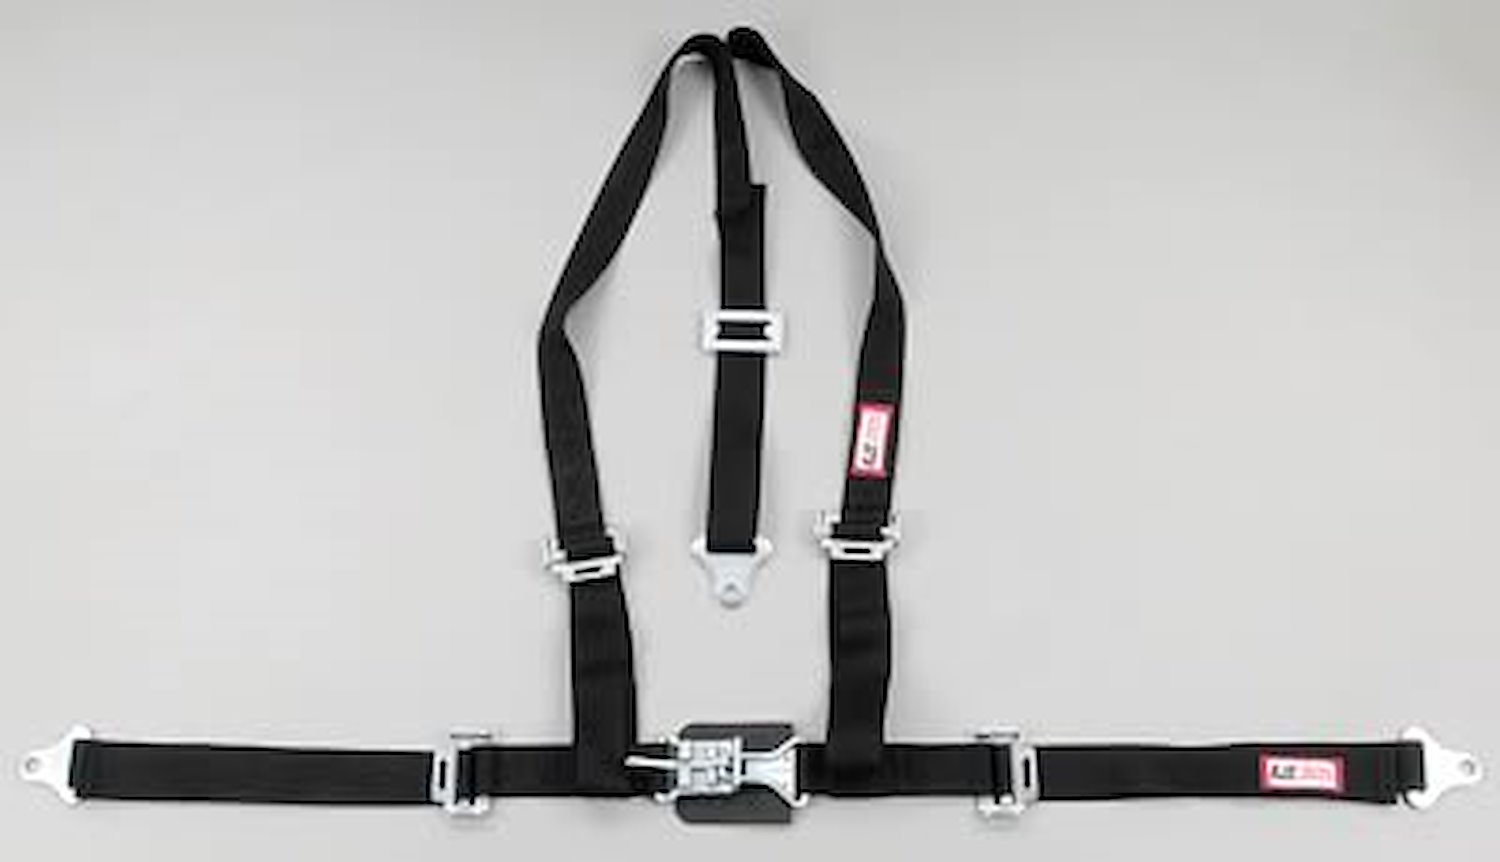 NON-SFI L&L HARNESS 2 PULL UP Lap Belt SEWN IN 2 S.H. V ROLL BAR Mount ALL BOLT ENDS BLUE